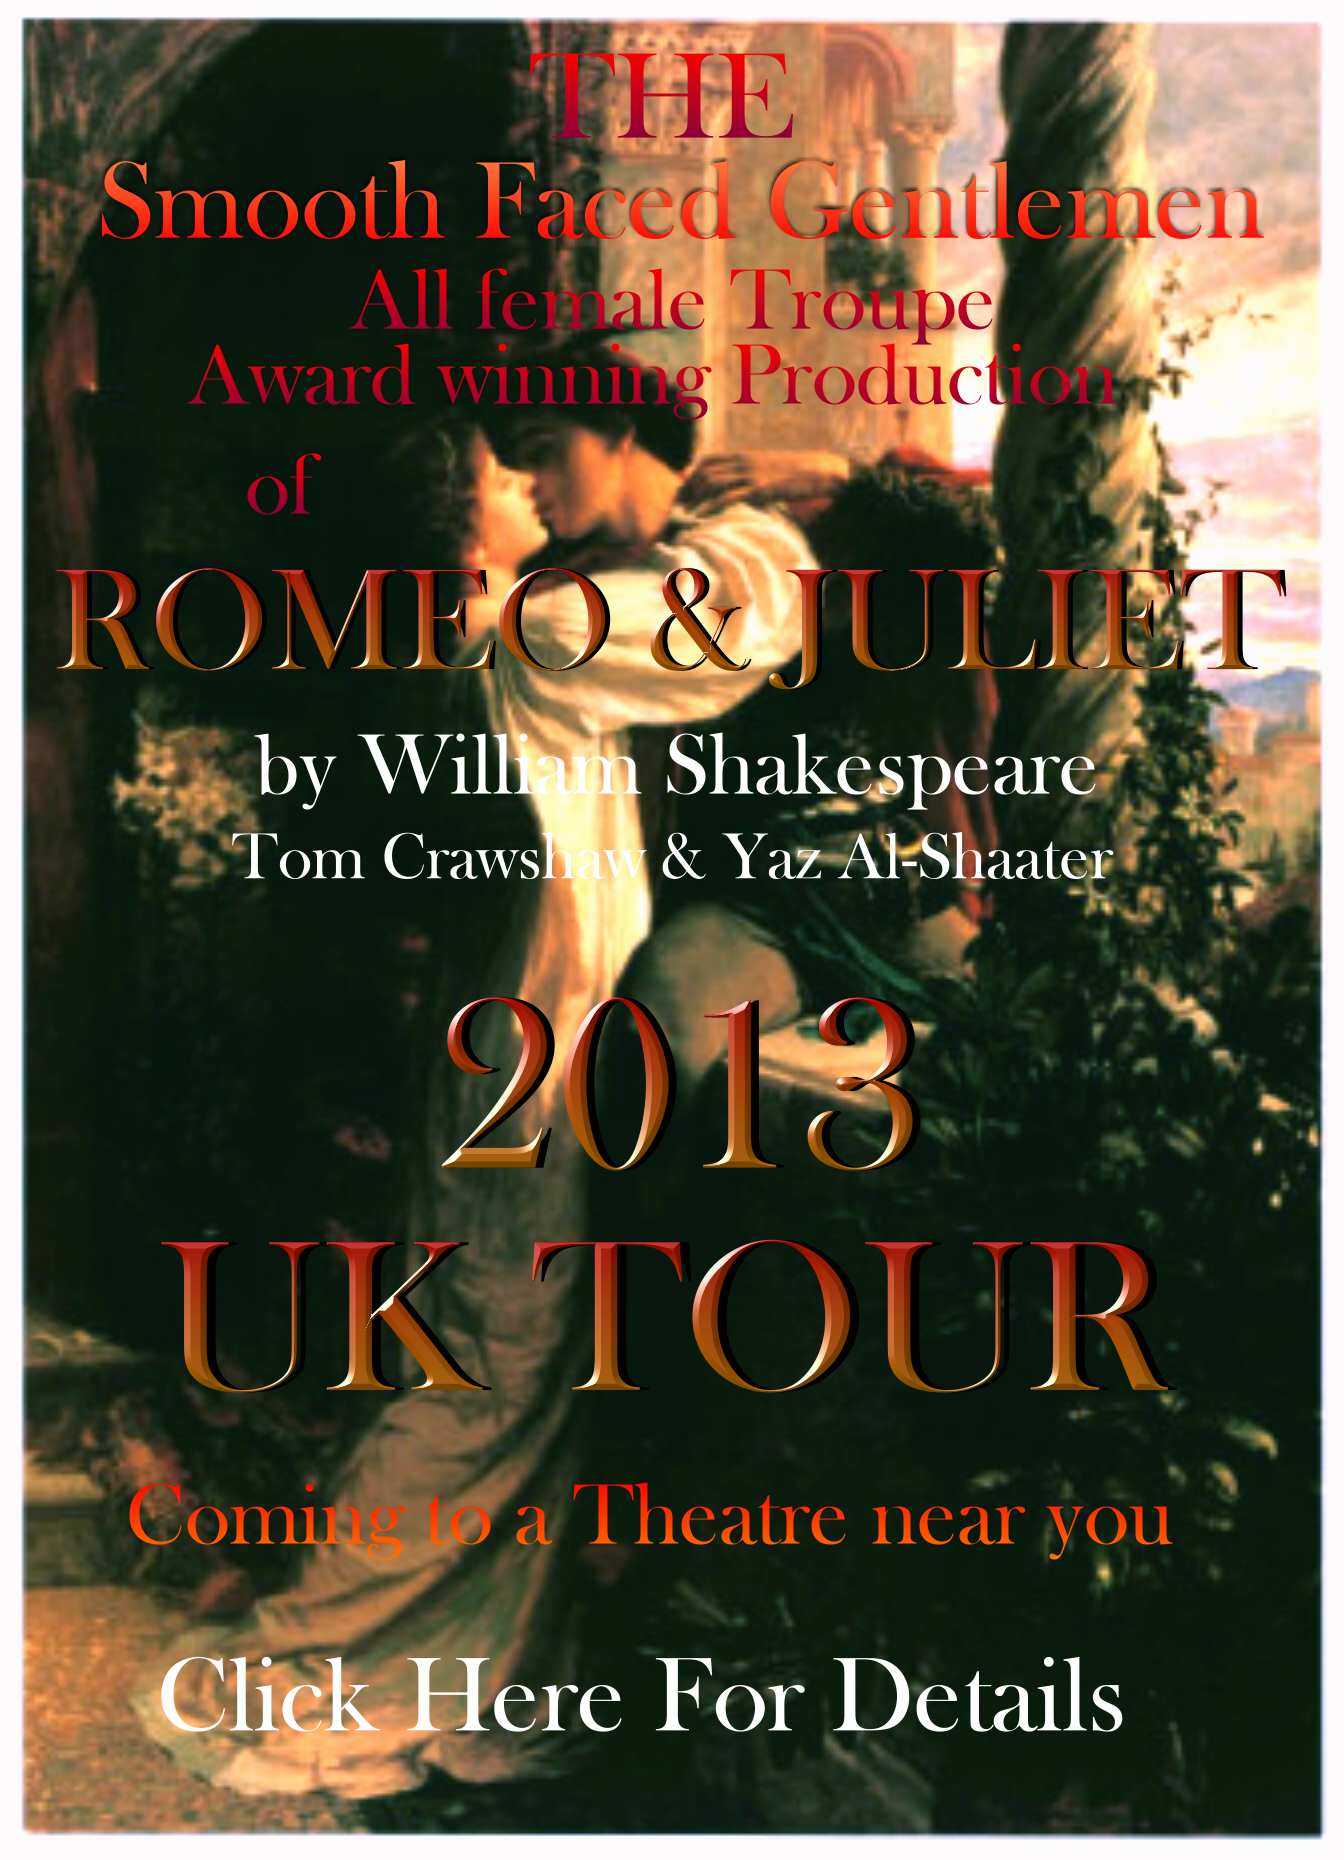 Romeo and Juliet poster for the Smooth Faced Gentlemen 2013